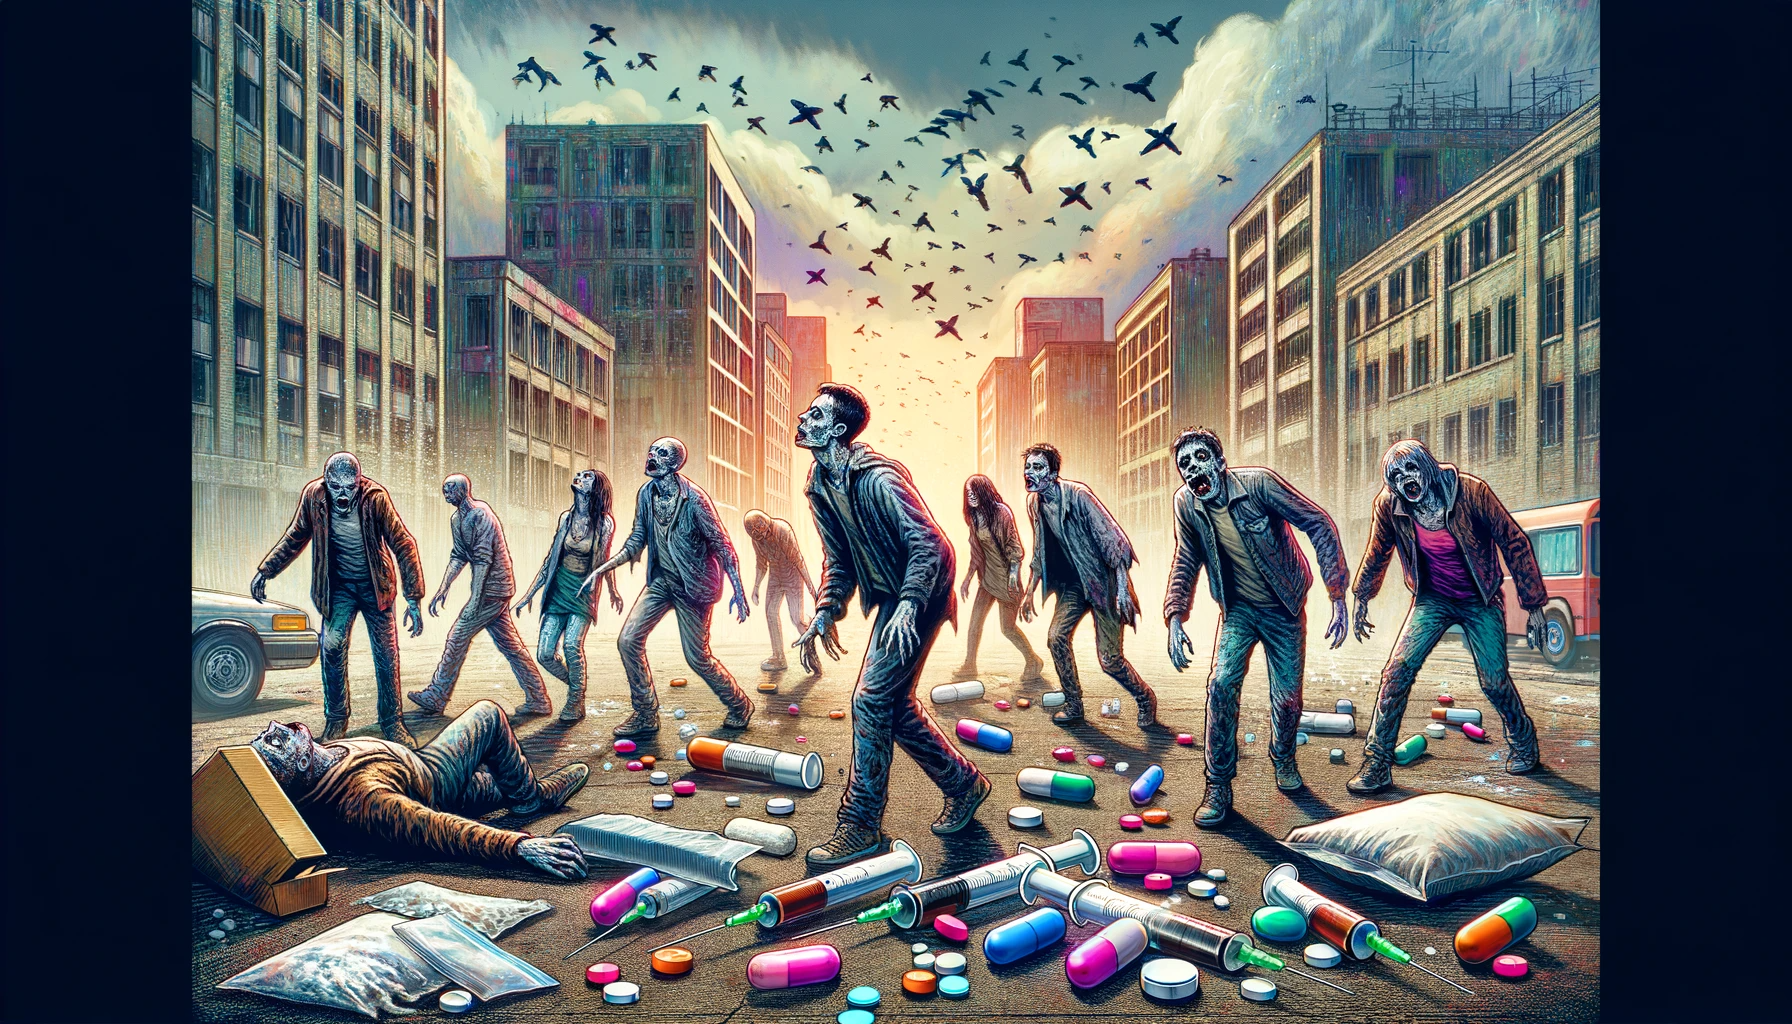 Zombies surrounding a pile of xylazine, or the zombie drug.